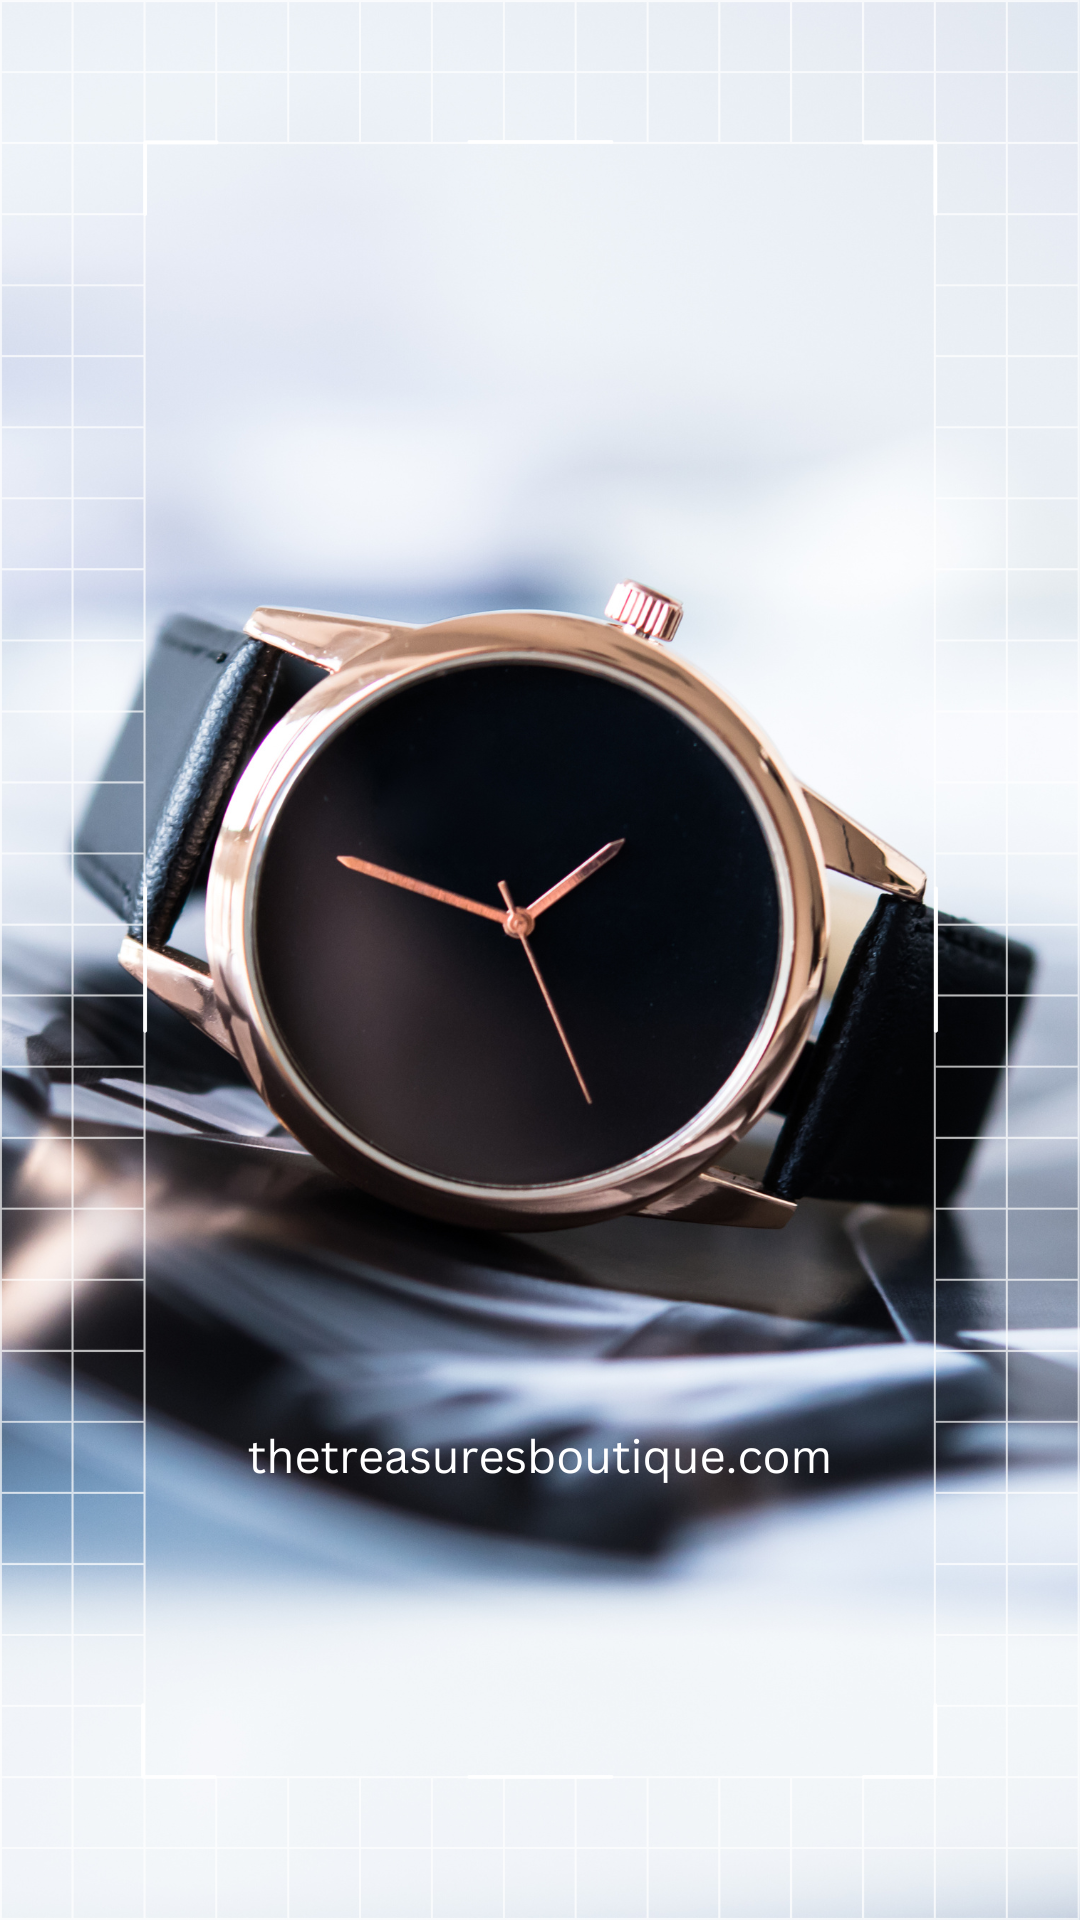 An array of exquisite luxury watches from The Treasures Boutique, showcasing timeless elegance and precision craftsmanship.